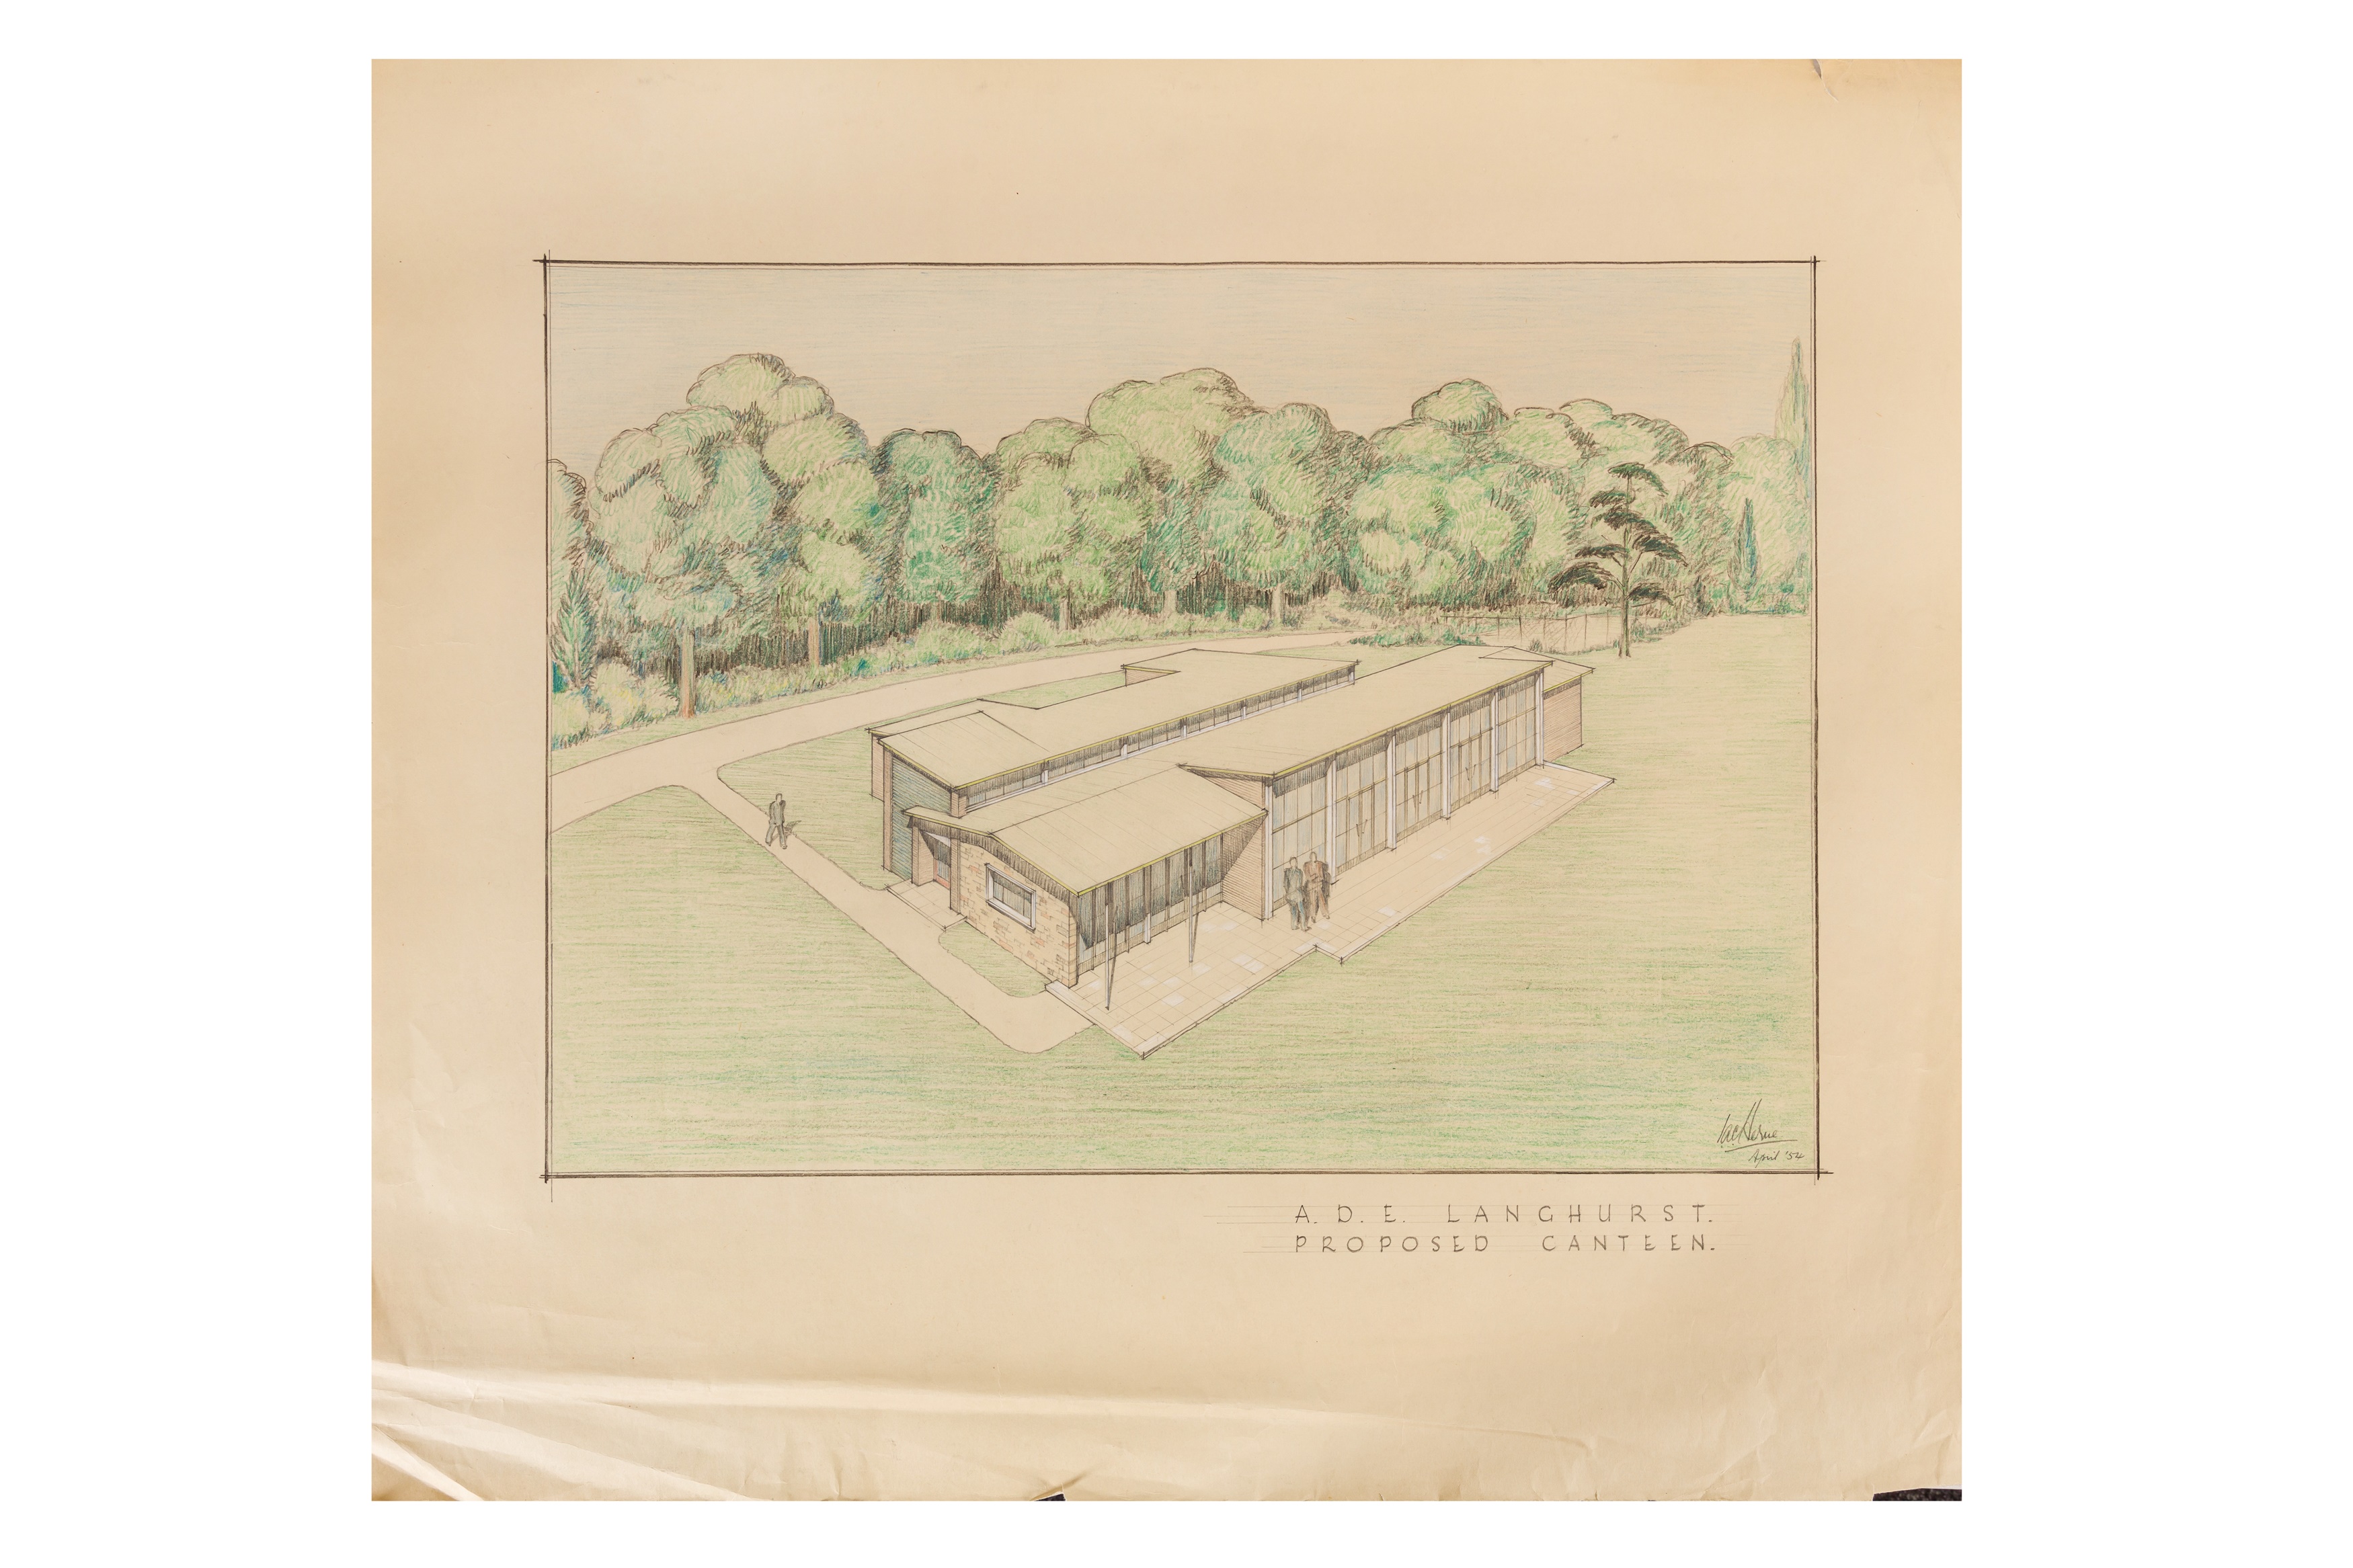 Archive of architect Ivor Herne, works in India, architectural illustrations, plans, stage designs a - Image 8 of 12